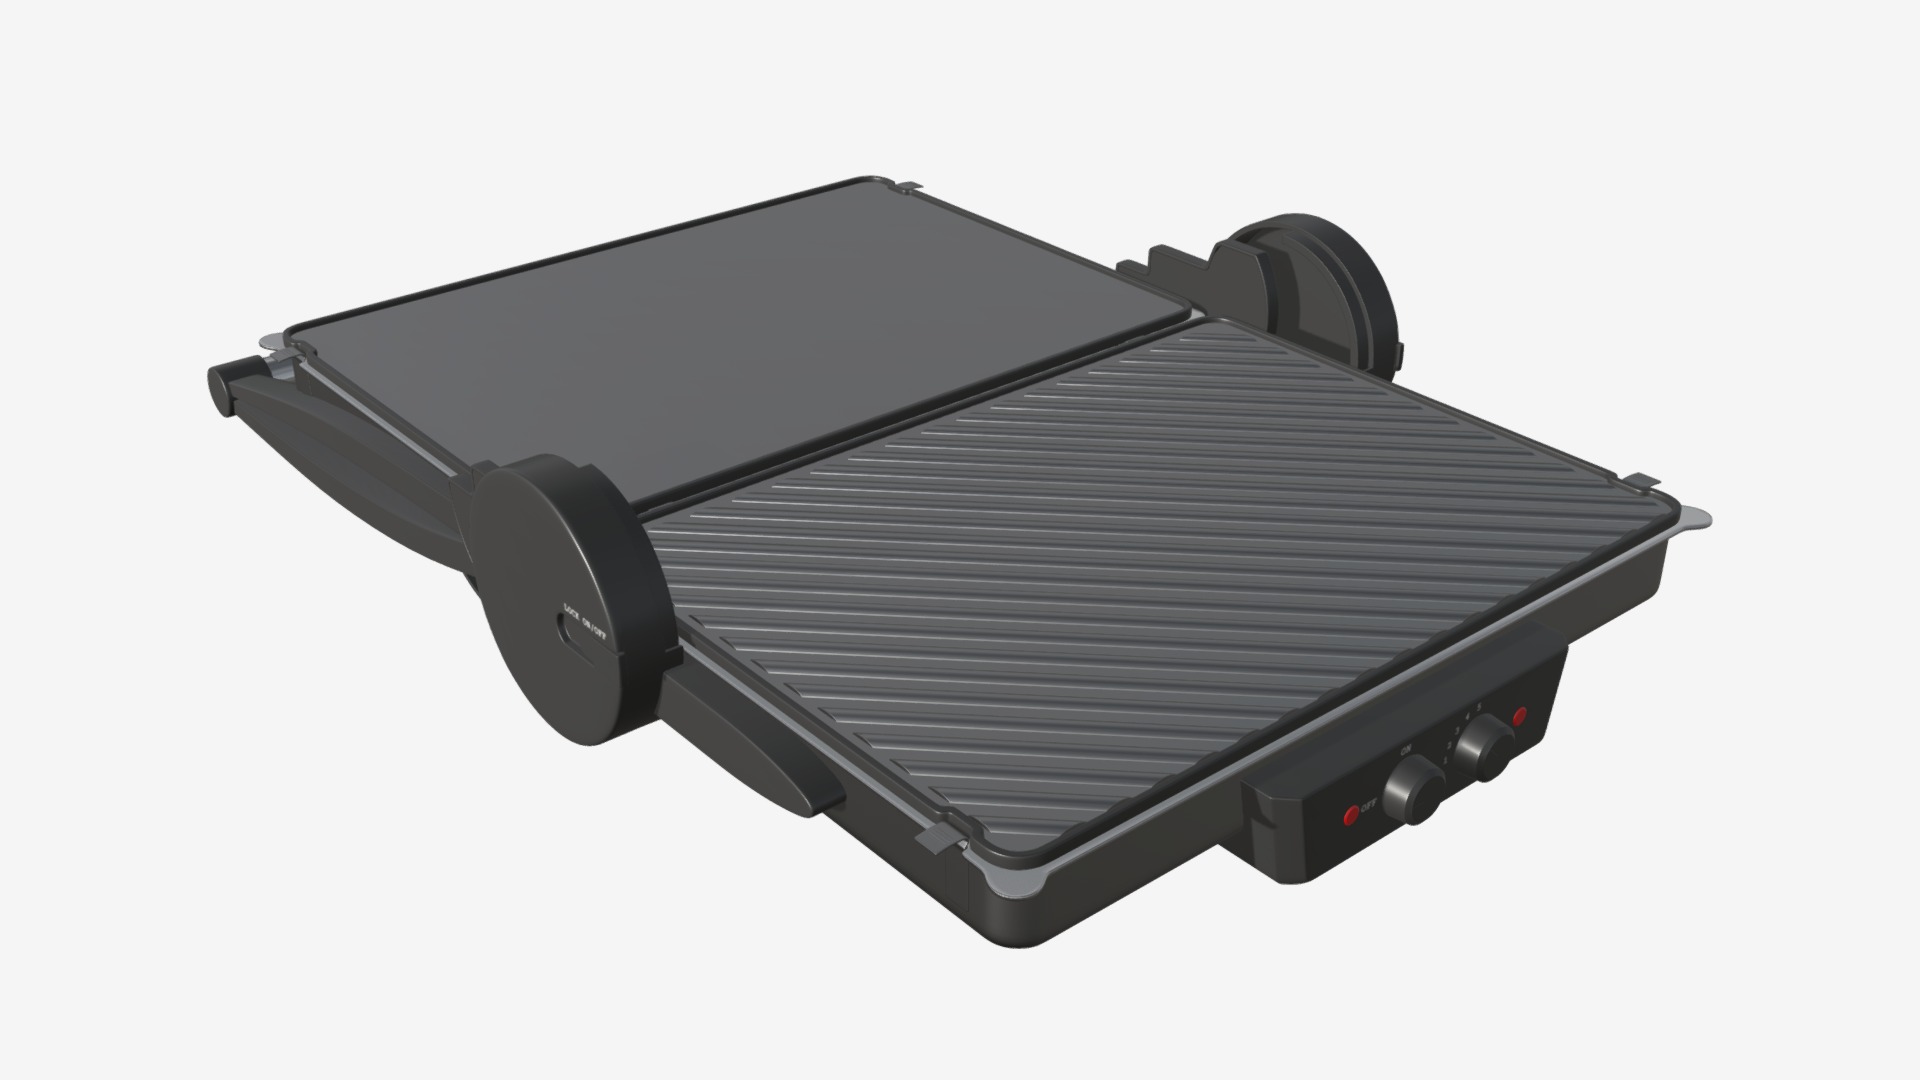 3D model grill opened - This is a 3D model of the grill opened. The 3D model is about a black rectangular object with a black handle.